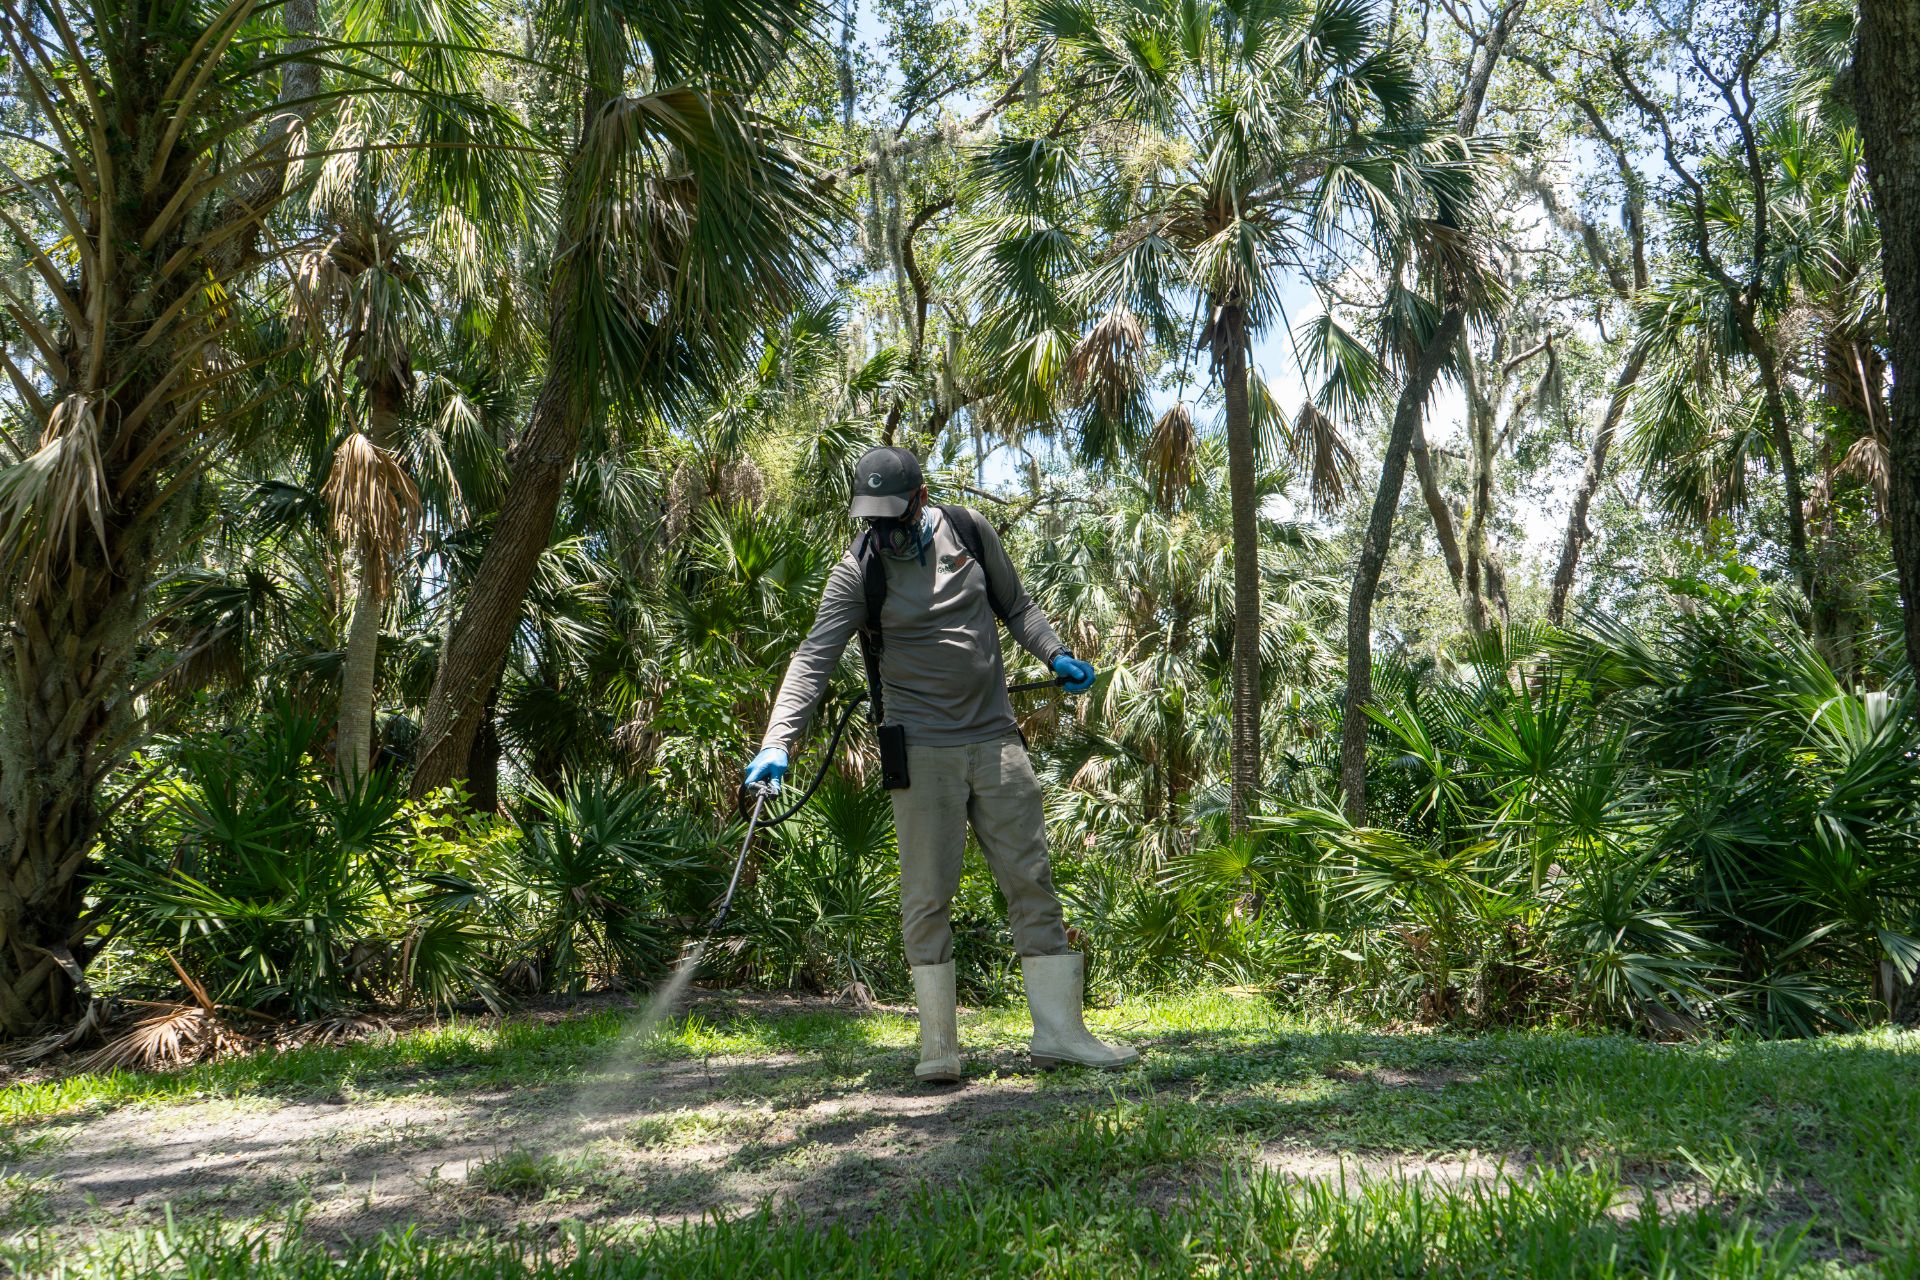 A GreenEdge staff member carefully spraying in the grass in Sarasota. Our trained professionals use precise techniques and high-quality products to control pests or enhance the health of your grass. Trust GreenEdge for expert grass spraying services that promote a lush and vibrant lawn.